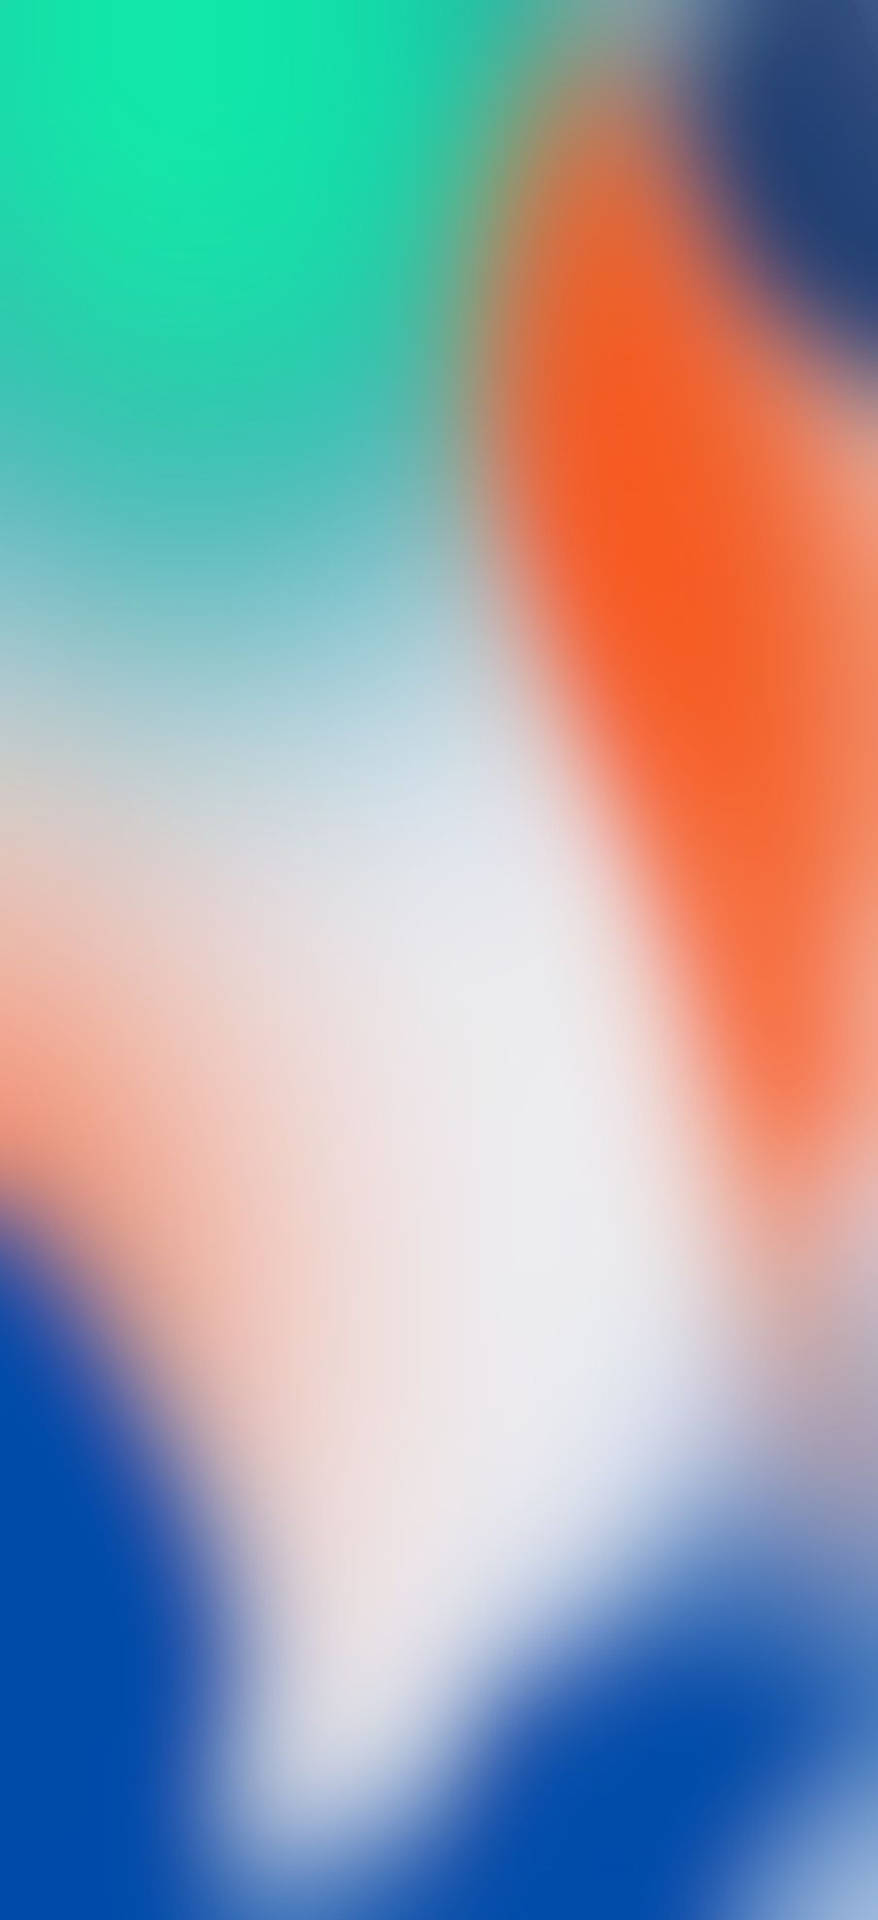 An Orange, Blue, And White Blurred Background Background